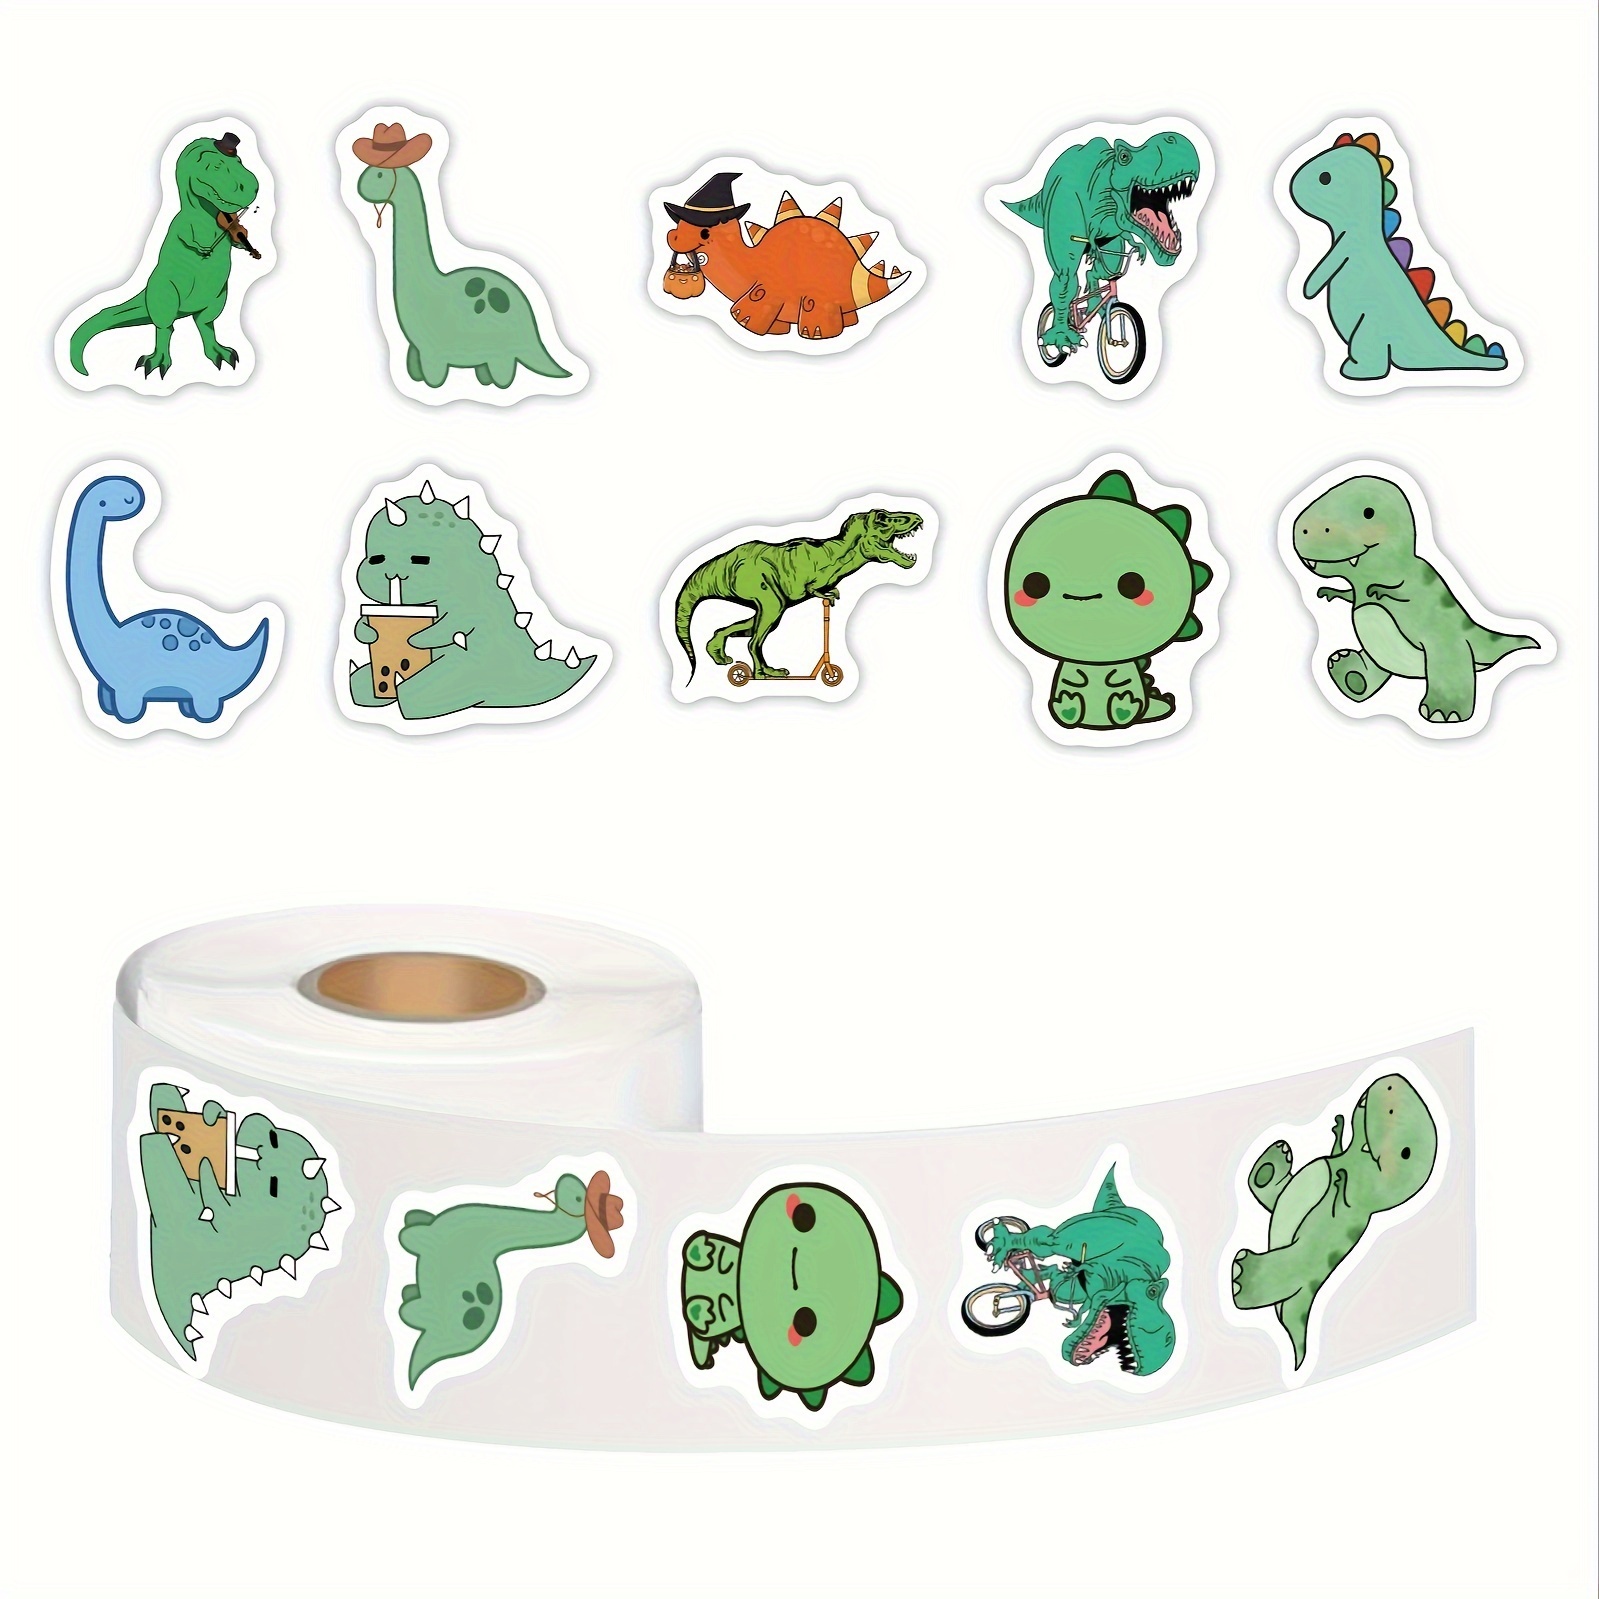 100 Pcs Cute Dinosaur Stickers for Kids 2–4 Year Old, Waterproof Vinyl Dino Stickers for Water Bottles, Stickers for Toddlers 2-4 Years, Dinosaur